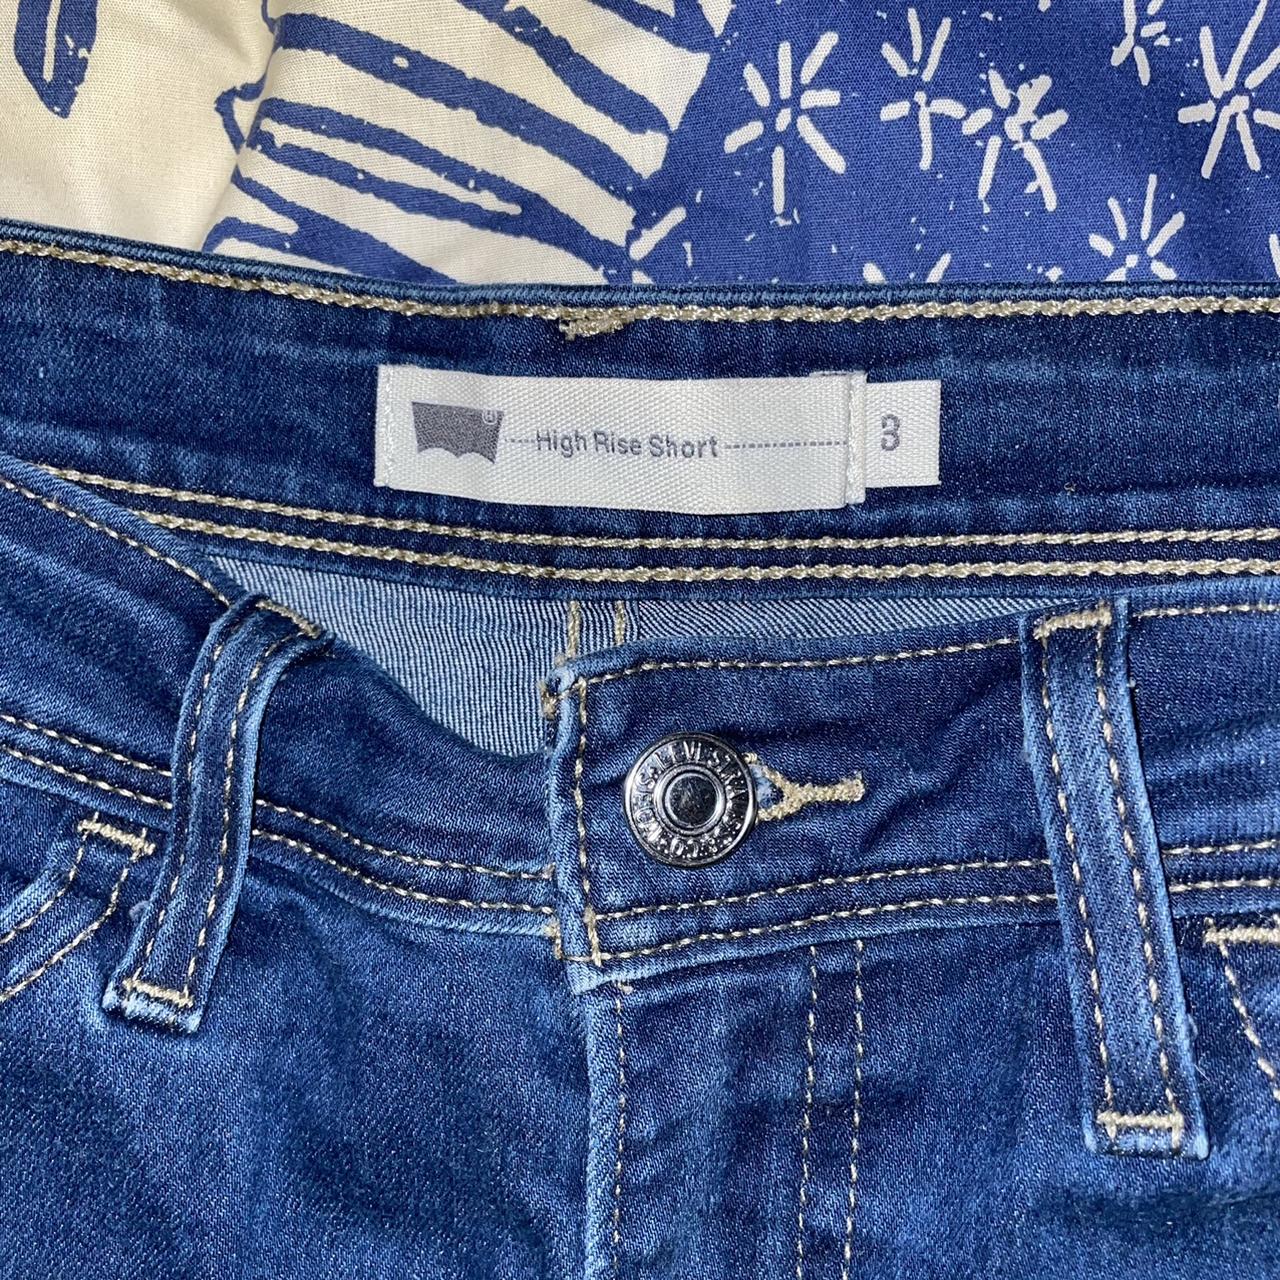 Levi's Women's Navy and Blue Shorts (3)